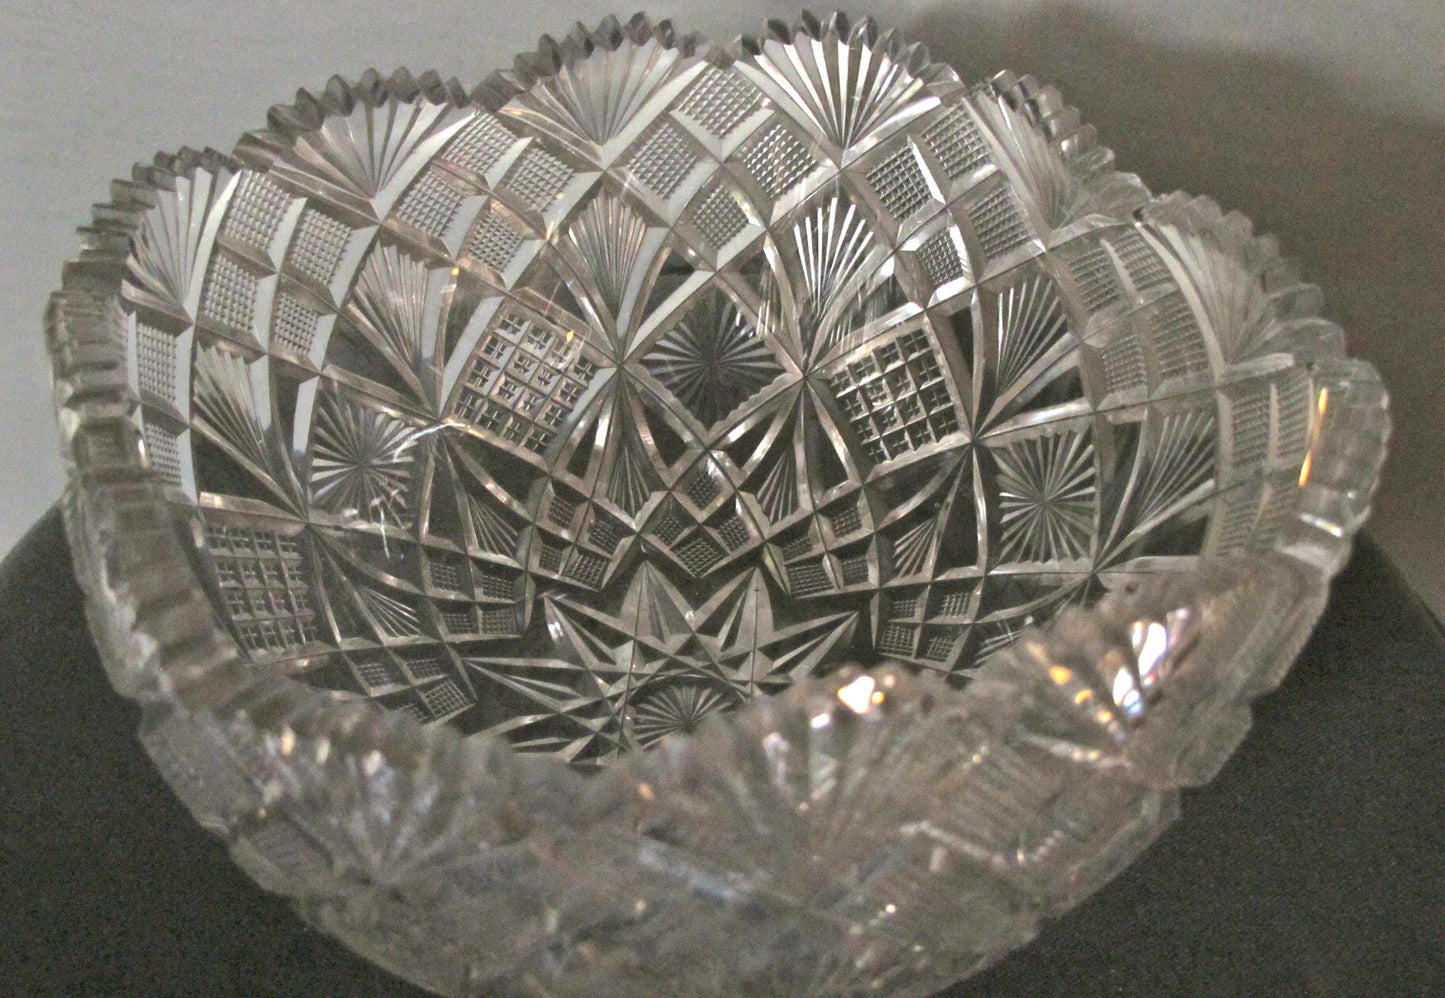 ABP cut glass square bowl American brilliant period 1886 -1915 - O'Rourke crystal awards & gifts abp cut glass